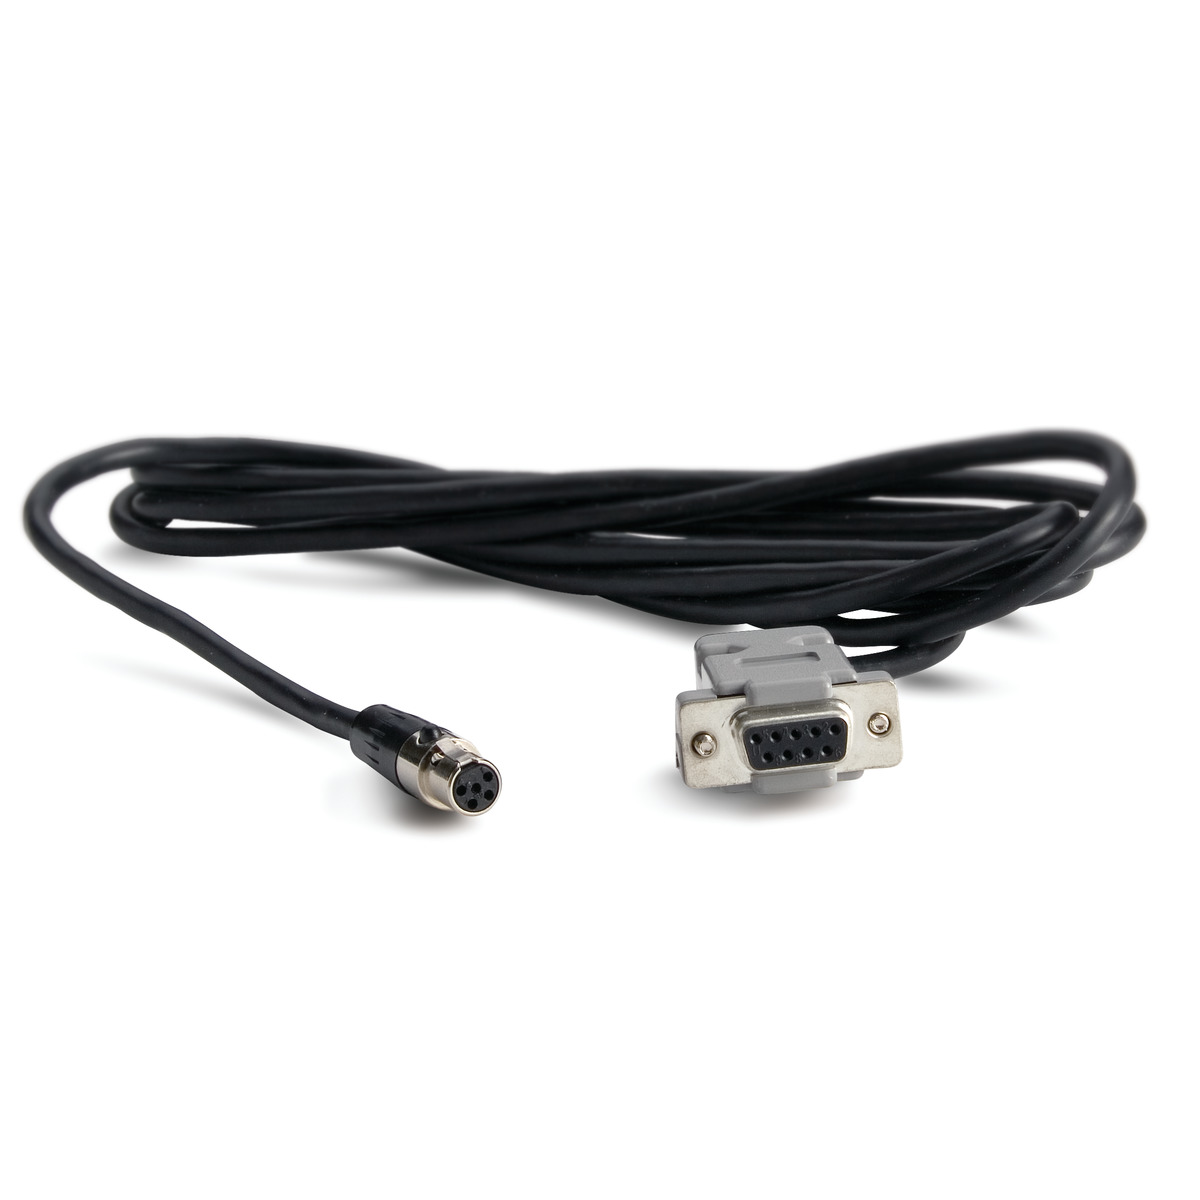 5 to 9 pin RS232 Serial Cable for PC Connection - HI920011